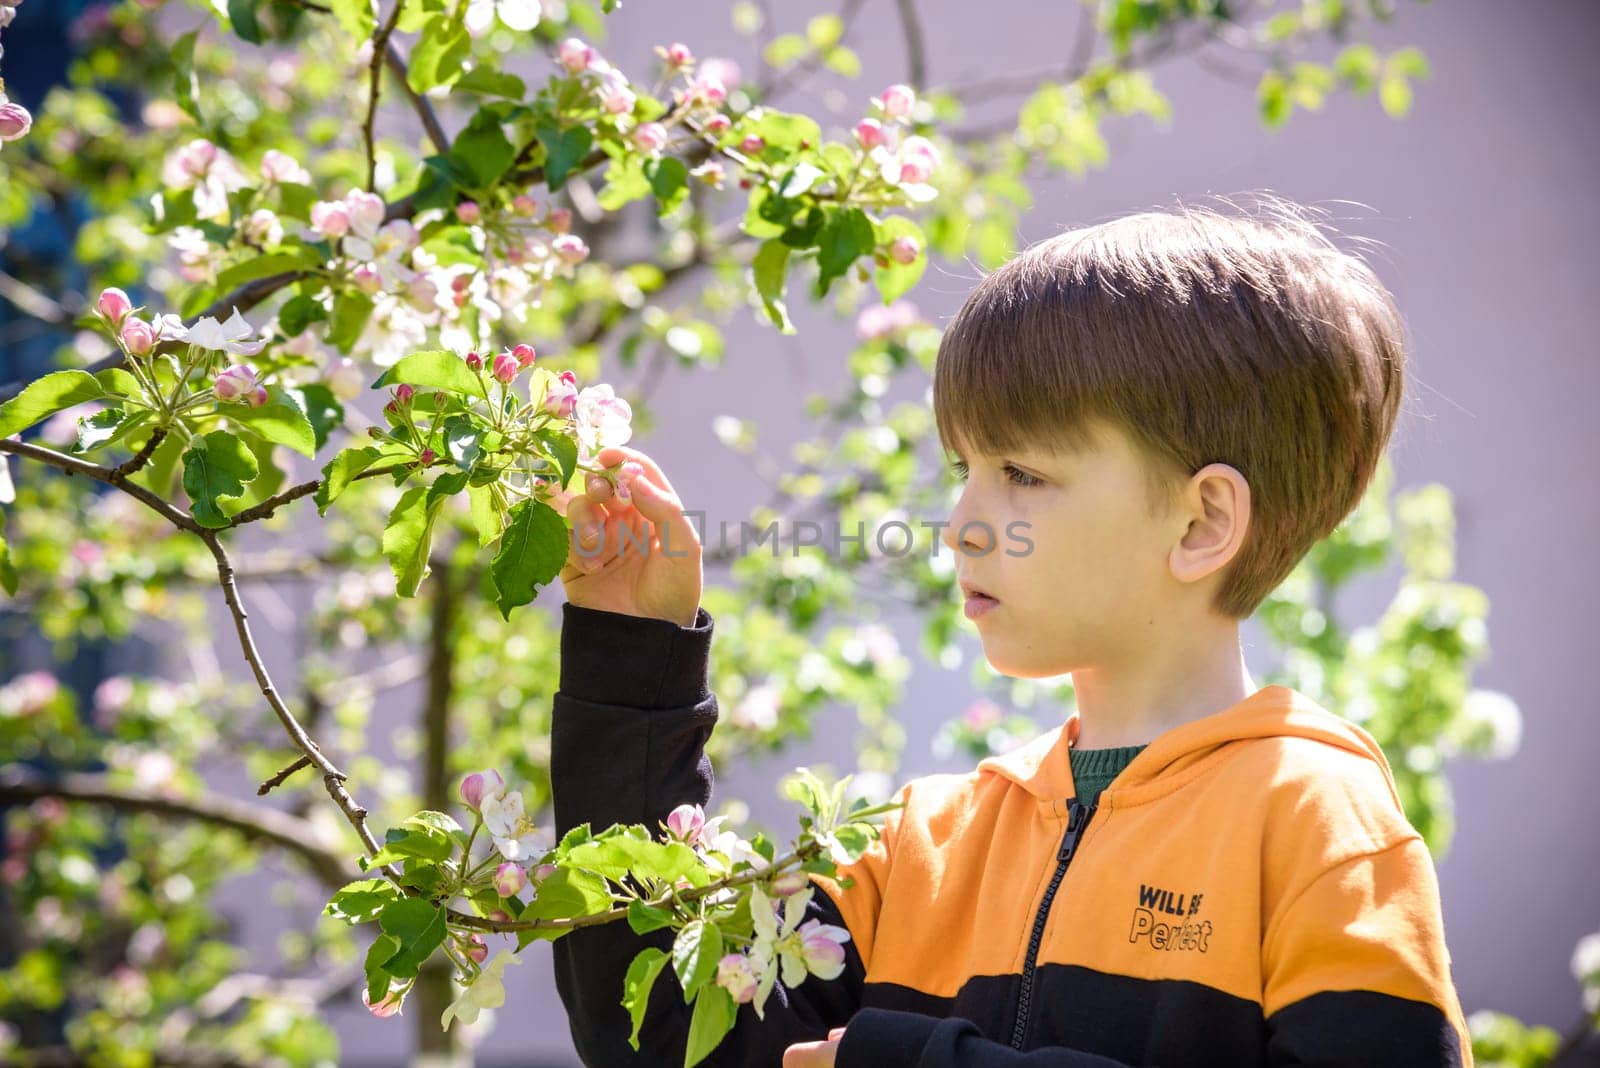 The boy at the apple blossom in the spring garden.